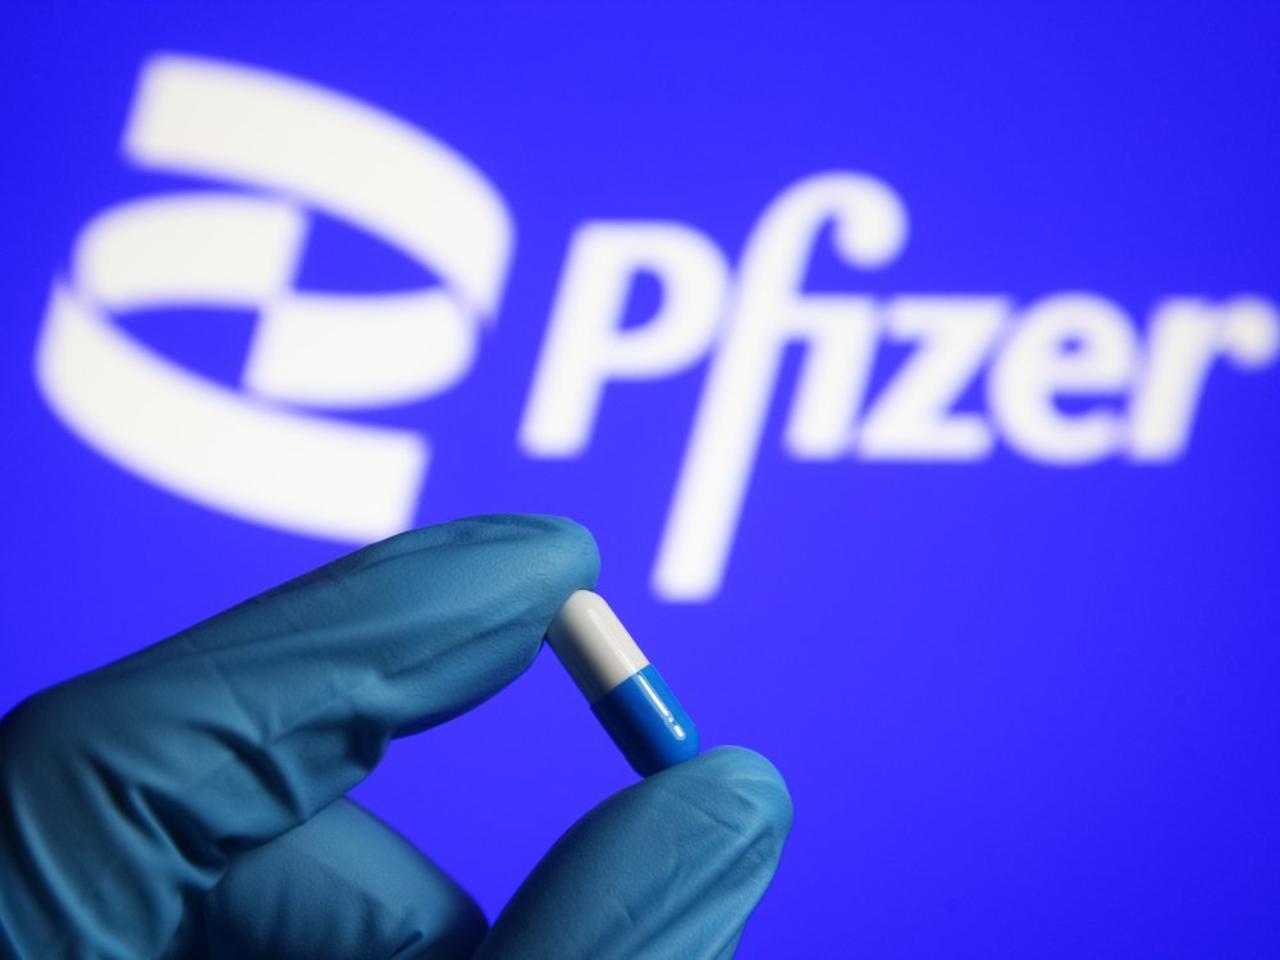 America To Buy Enough of Pfizer’s COVID-19 Pills for 10 Million People